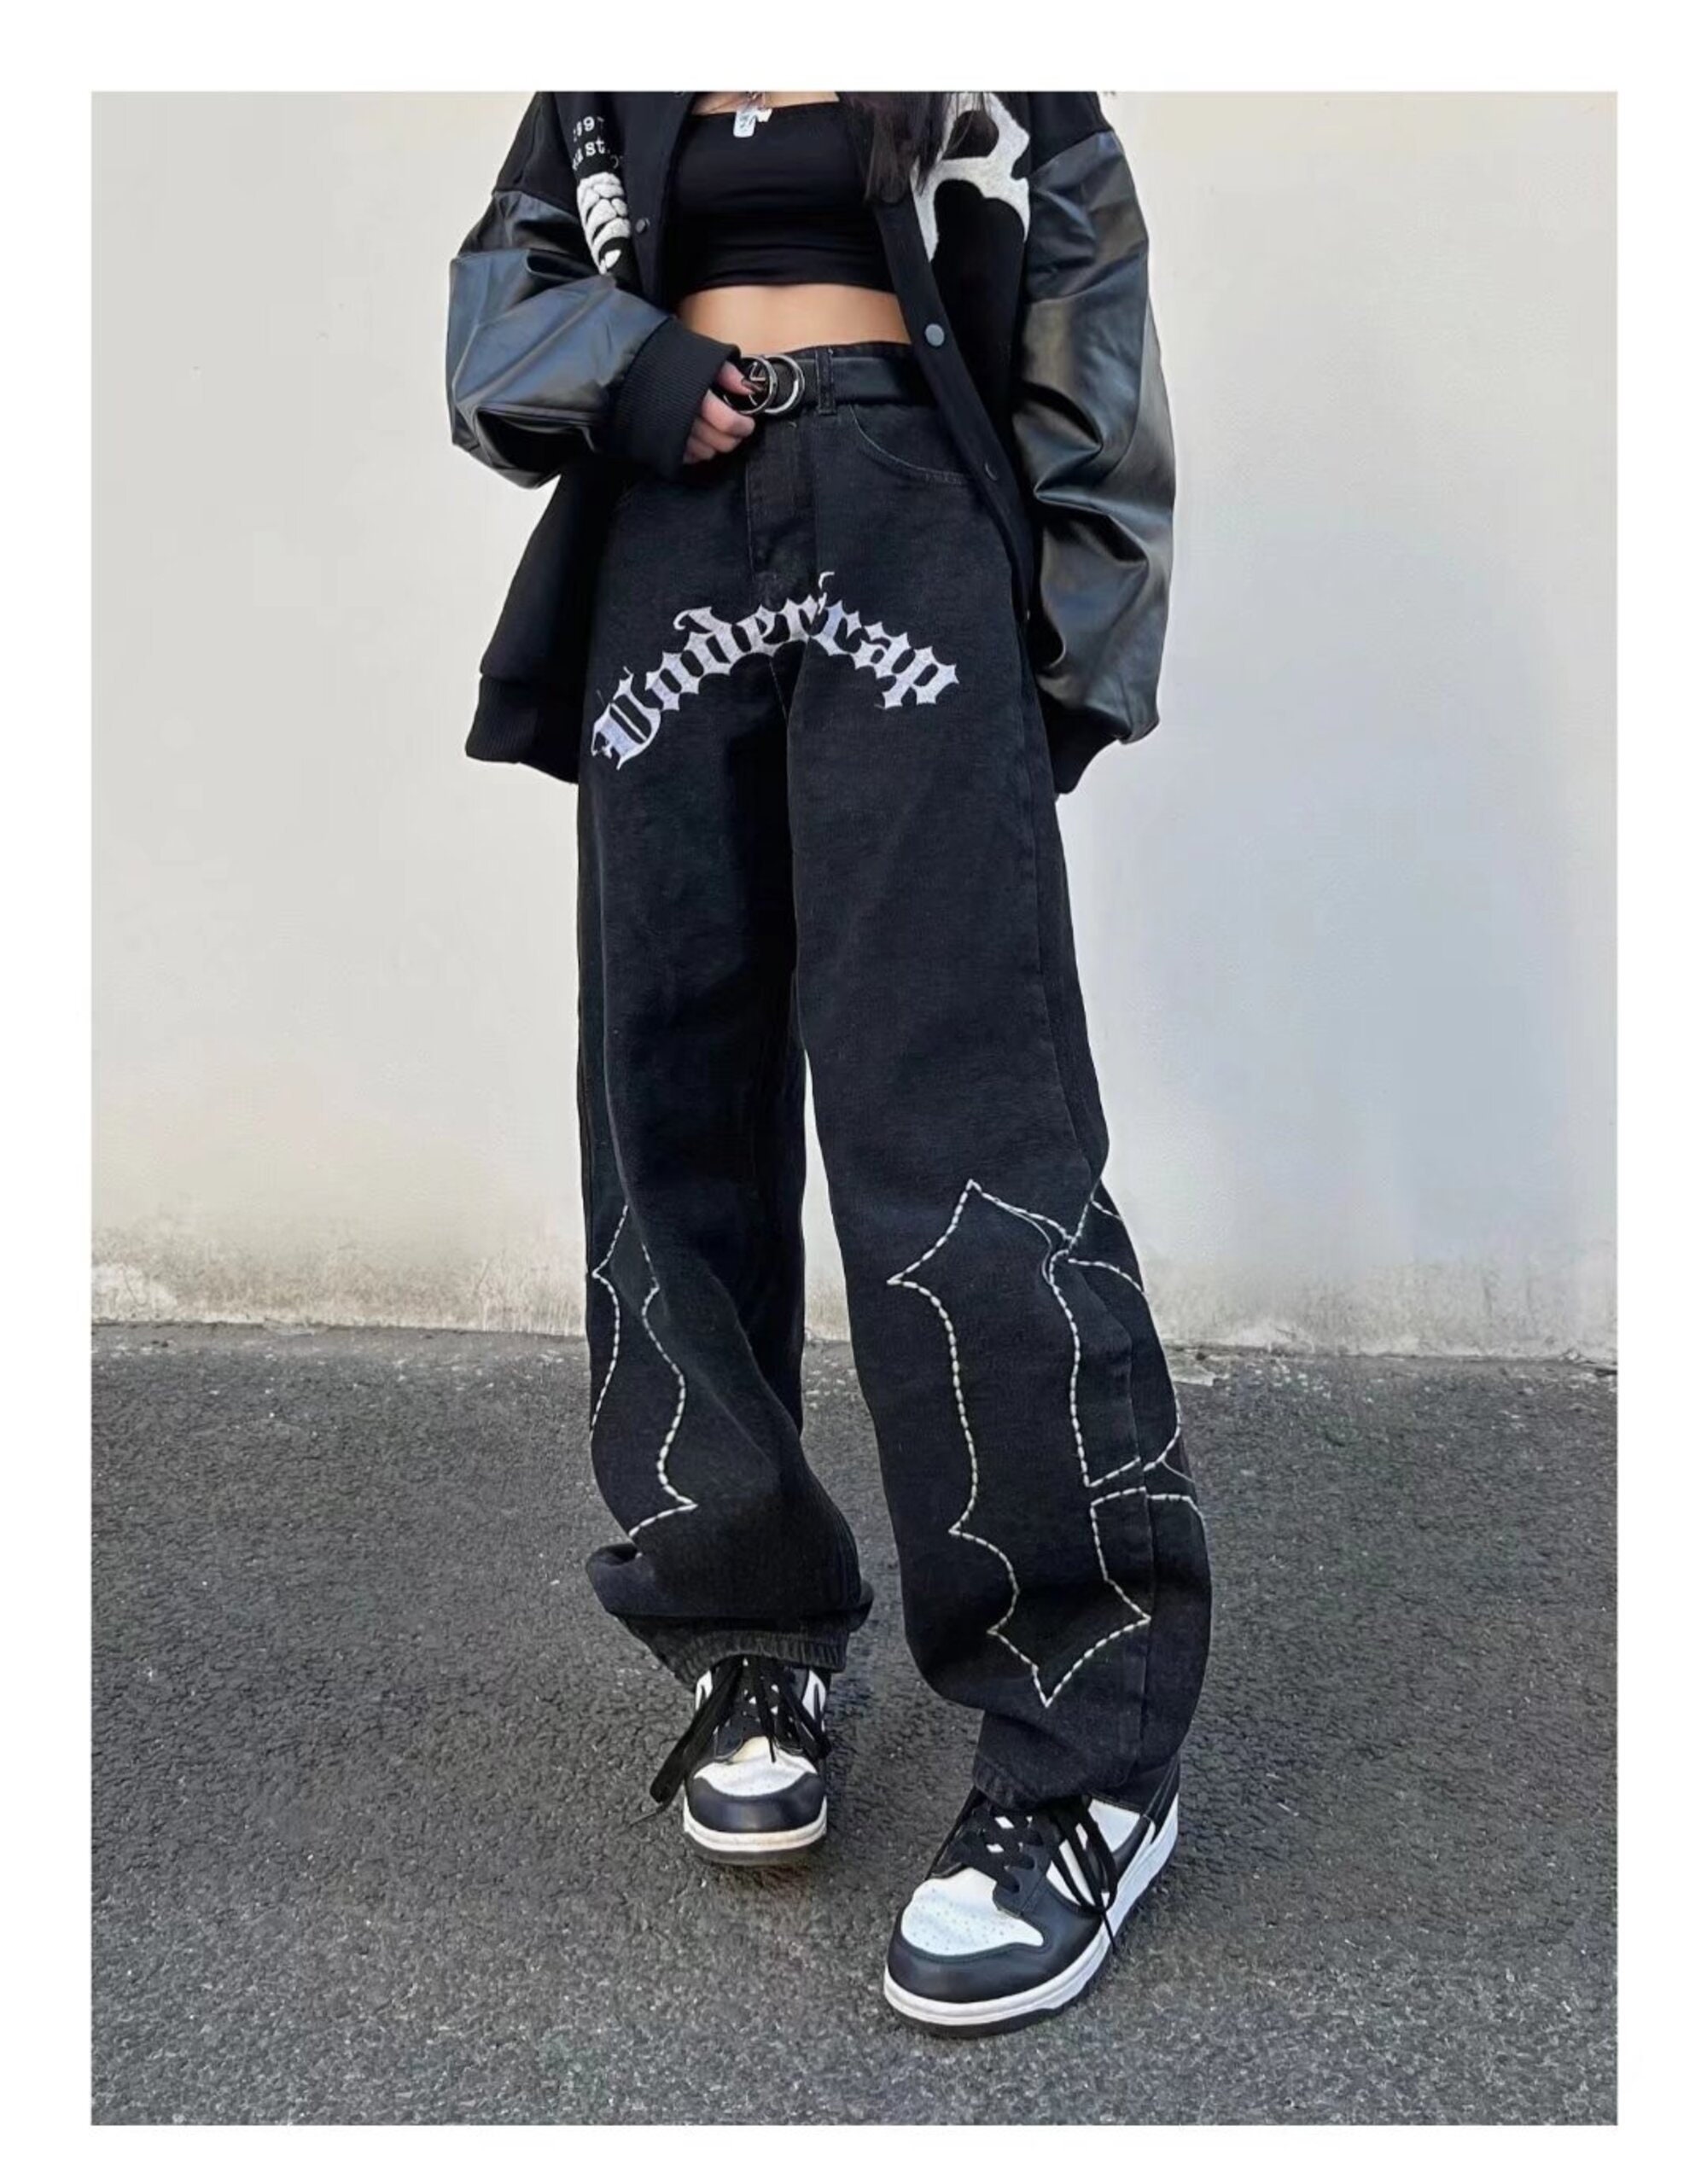 Dark Streetwear Letter Embroidery Black Baggy Men Straight Jeans Pants Y2k Clothes Casual Women Denim Trousers Ropa Hombre